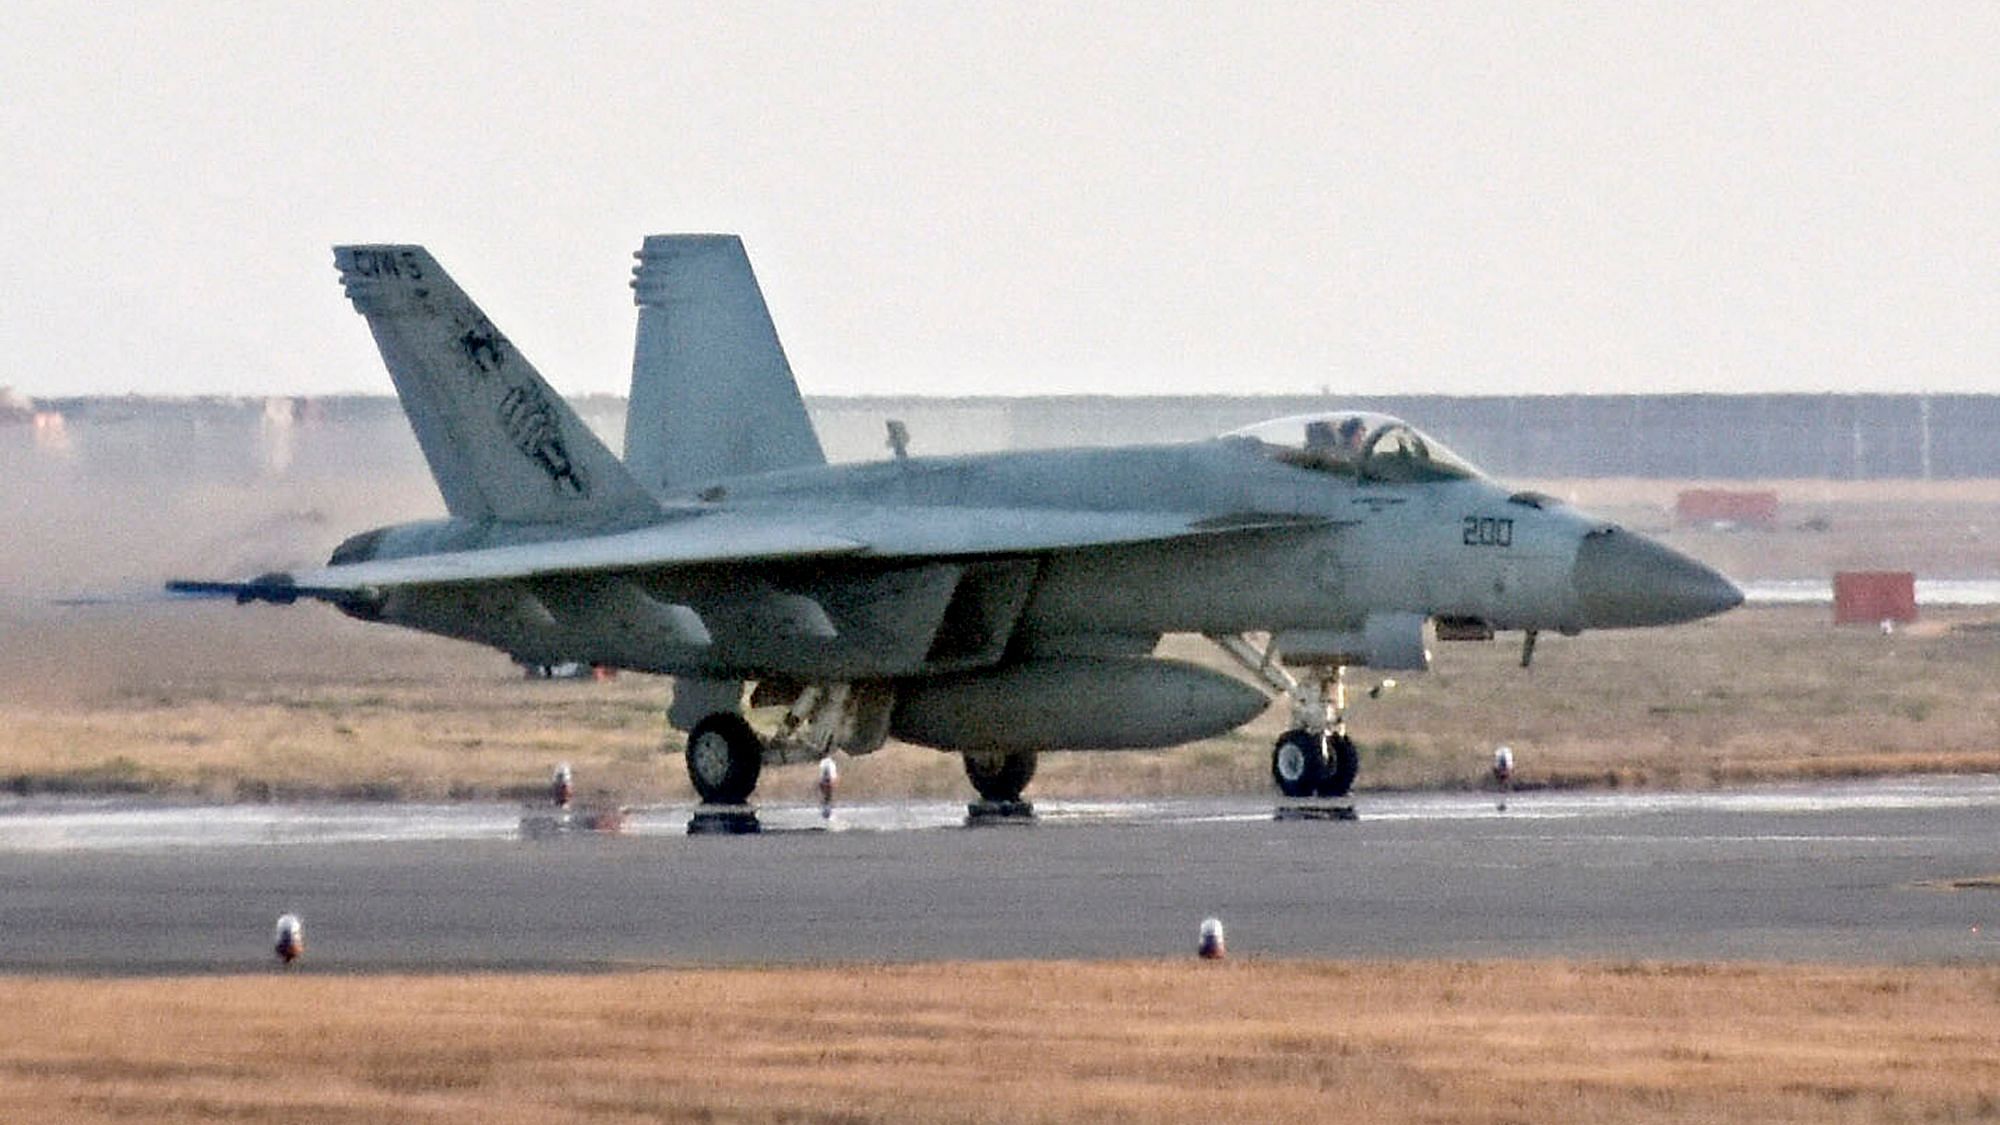  Photo of a F/A-18 jet at United States Marine Corps air station in Iwakuni, western Japan.